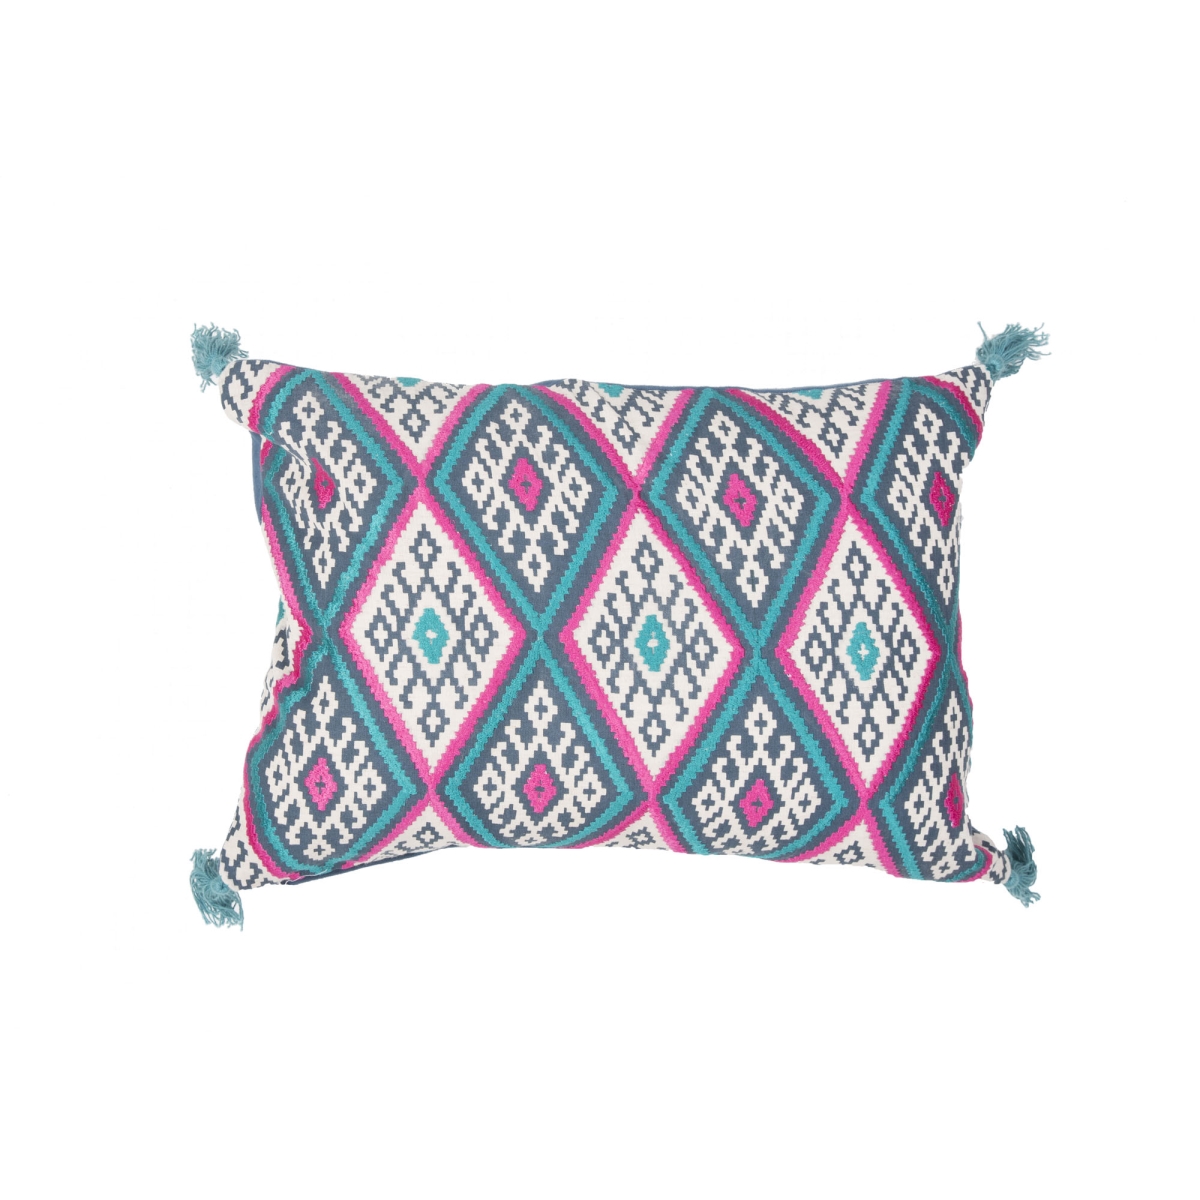 Plw102157 14 X 20 In. Traditions Made Modern Pillows Museum Ifa Yuma Turquoise & Pink Geometric Poly Throw Pillow